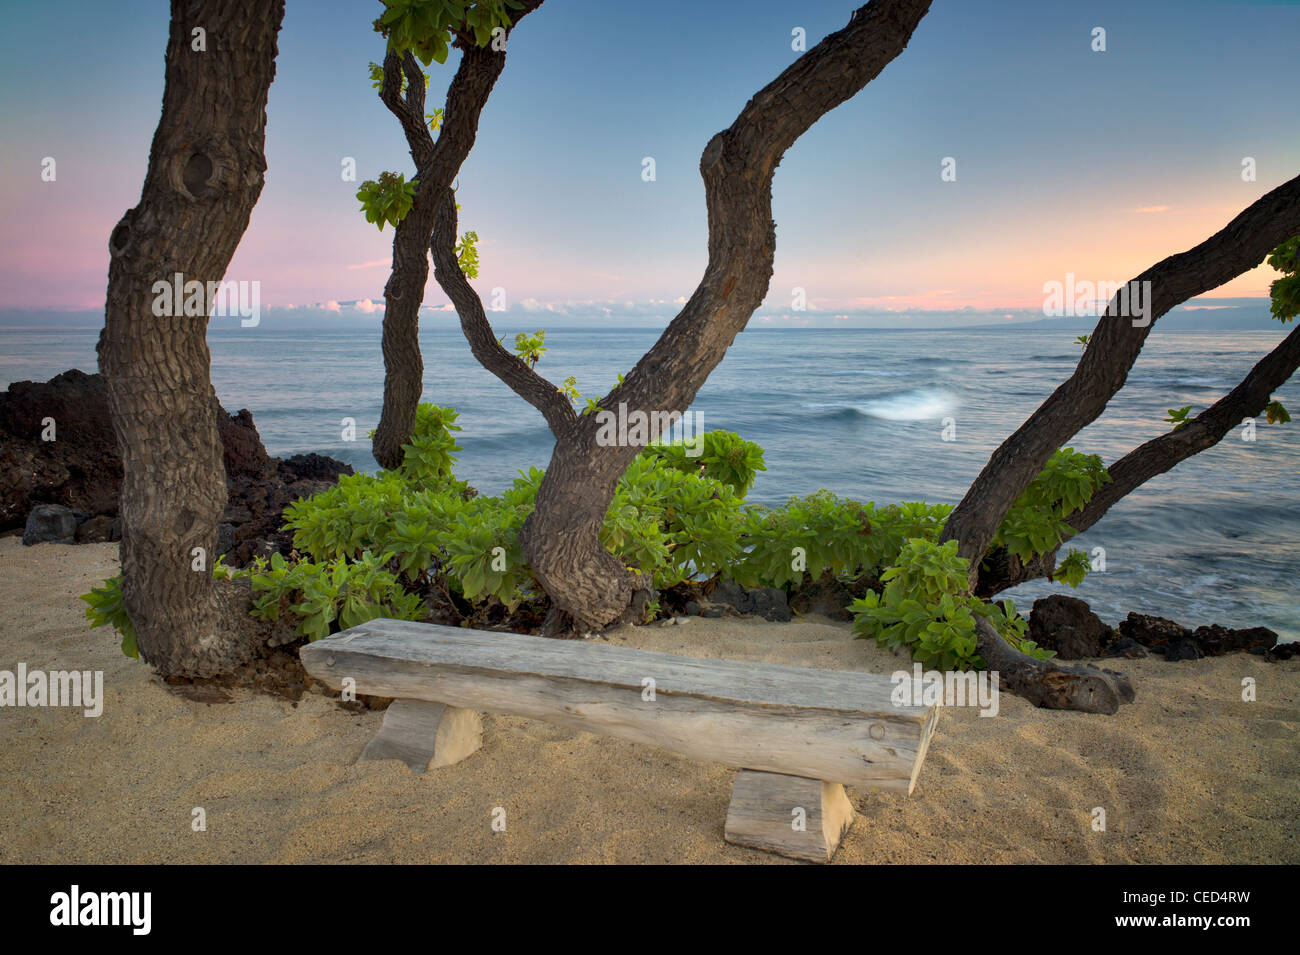 Heliotope trees and path at ocean side. Hawaii, The Big Island. Stock Photo